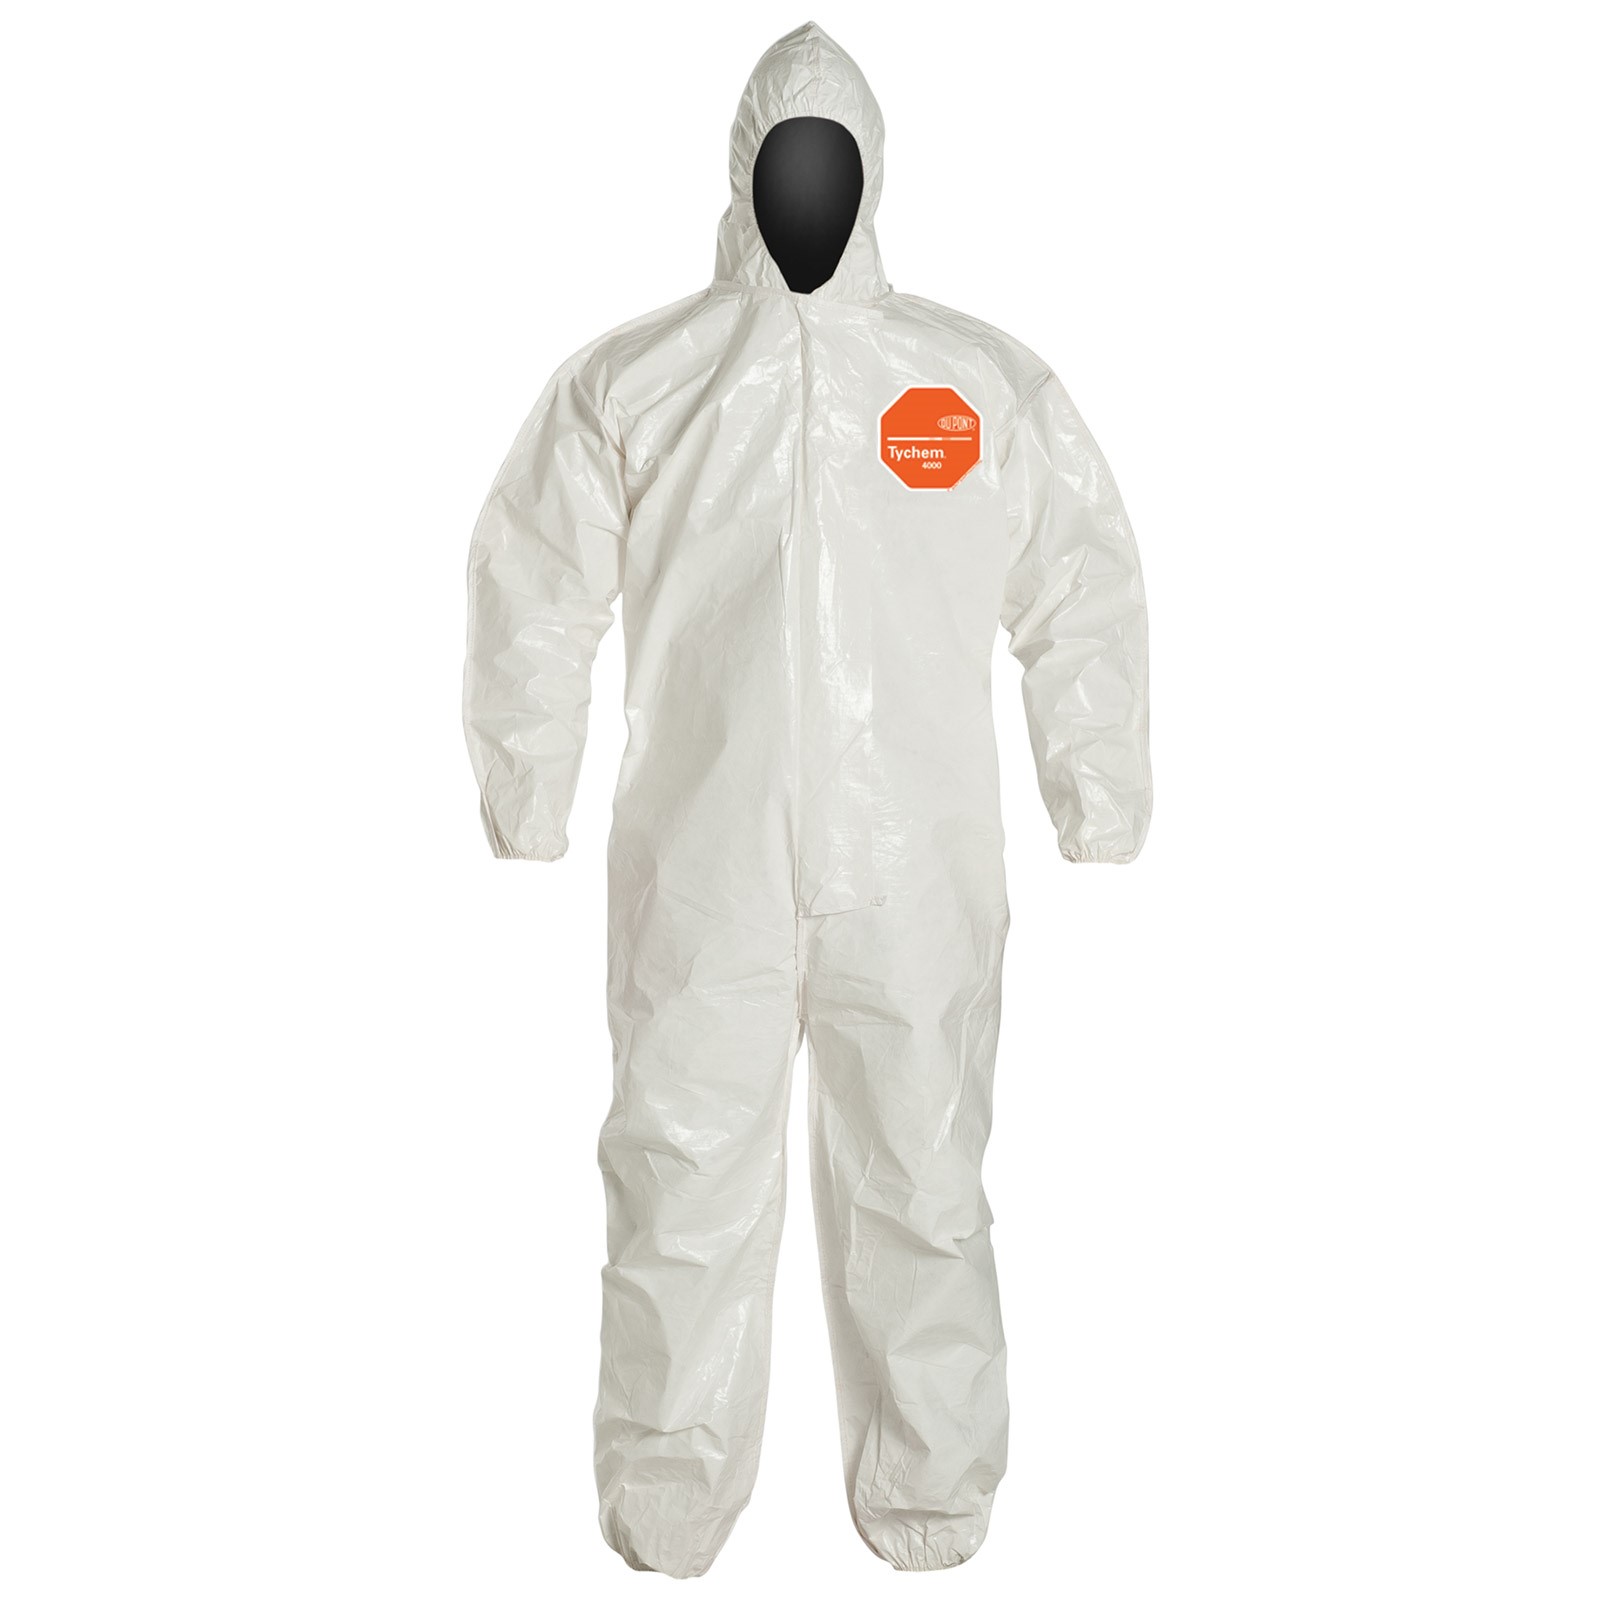 DuPont Tychem SL Hood Elastic Wrists & Ankles Coveralls Each 